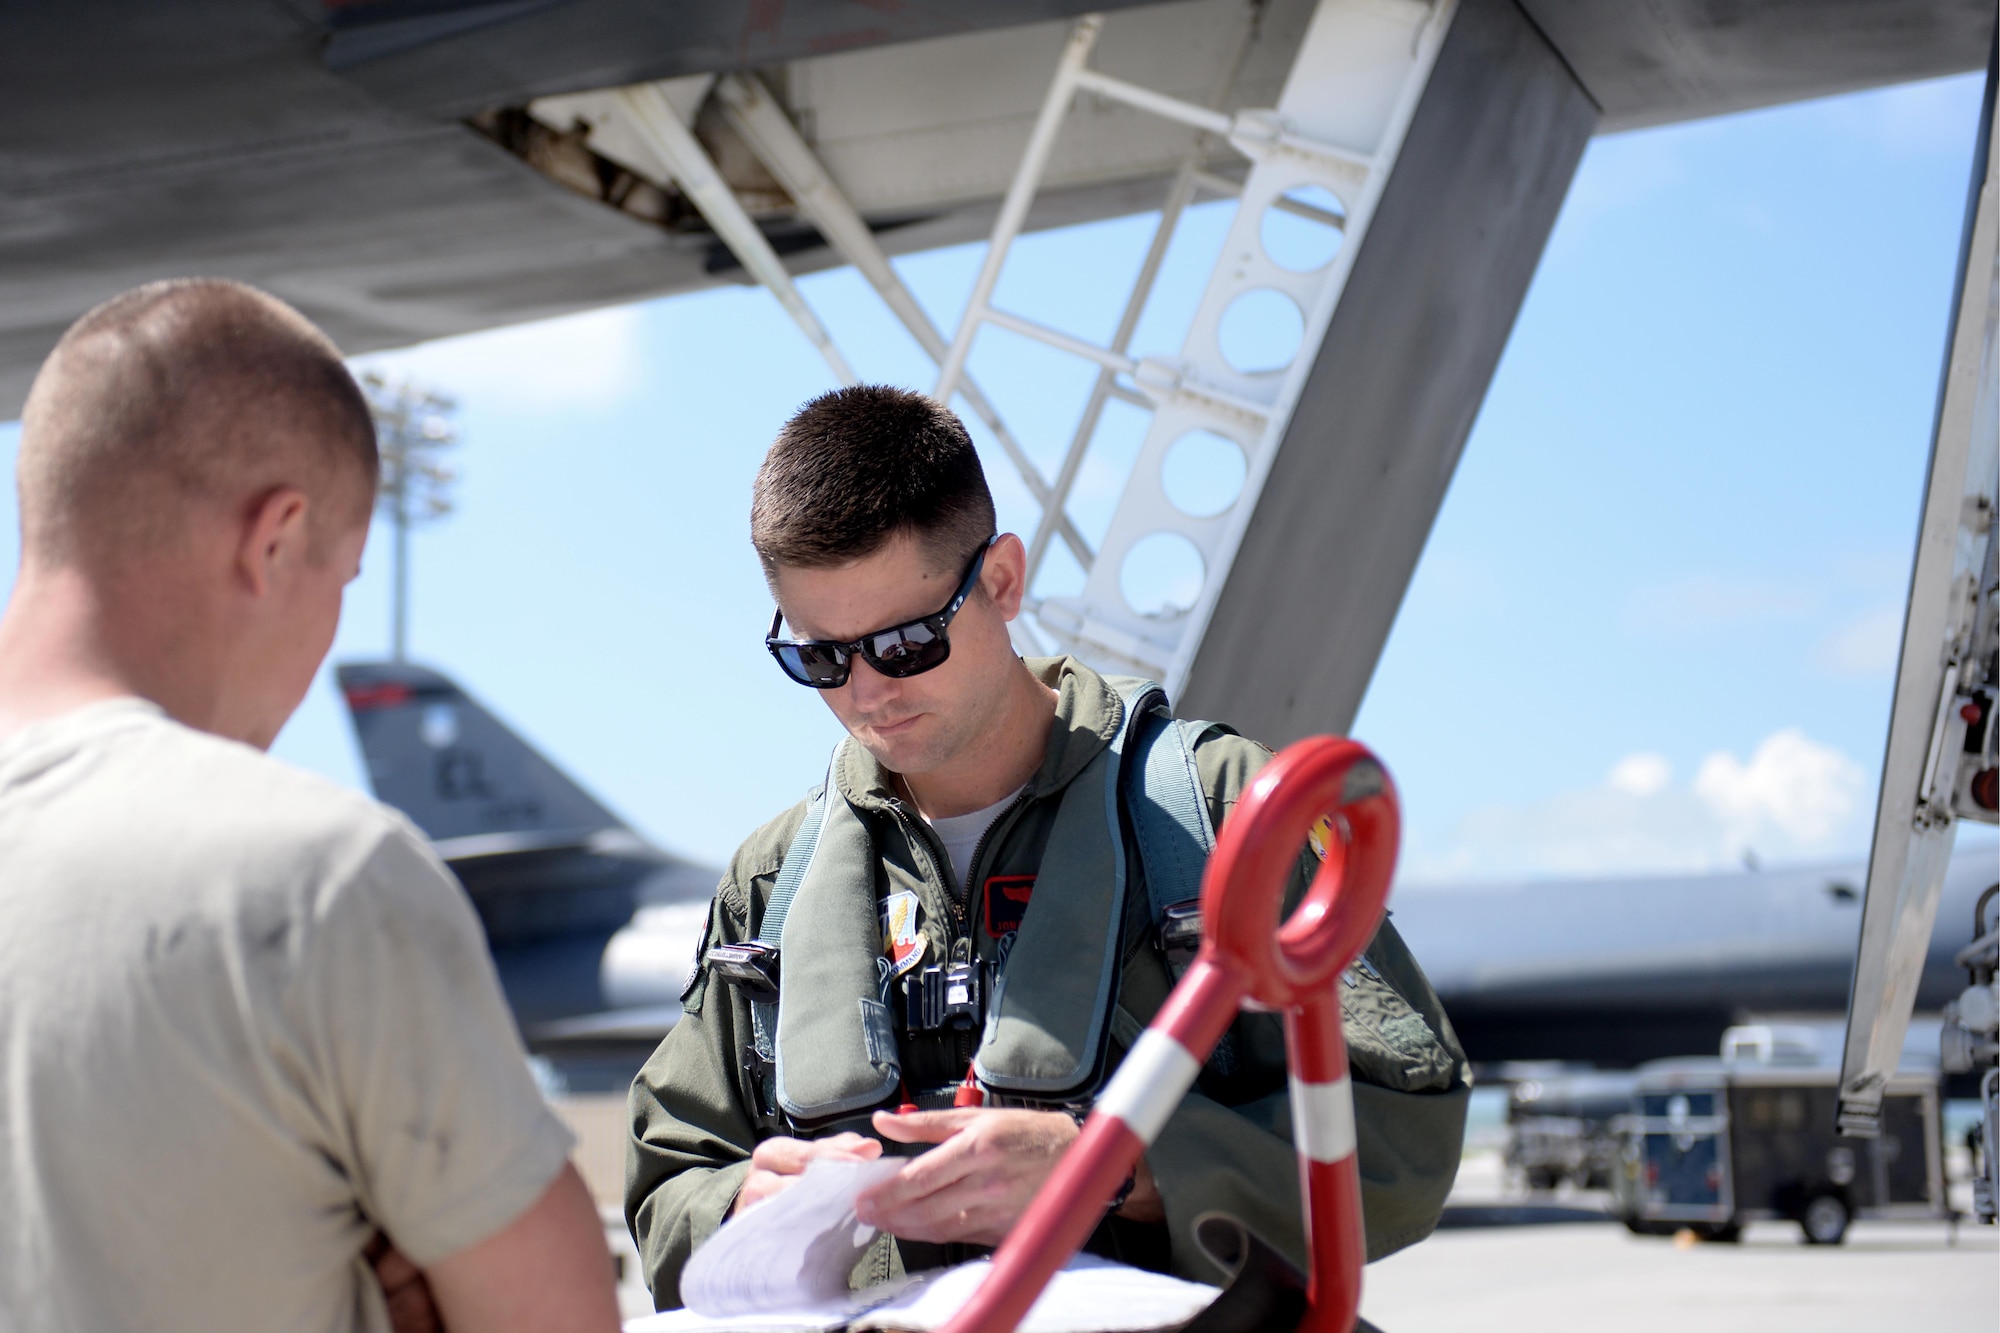 Maj. Jonathan Slinkard, 34th Bomb Squadron B-1 pilot, reviews aircraft forms prior to take off at Ellsworth Air Force Base, S.D., June 3, 2014. Base aircrews employed the munitions assembled by Airmen and Sailors as a part of a joint mission exercise. (U.S. Air Force photo by Airman 1st Class Rebecca Imwalle/Released)